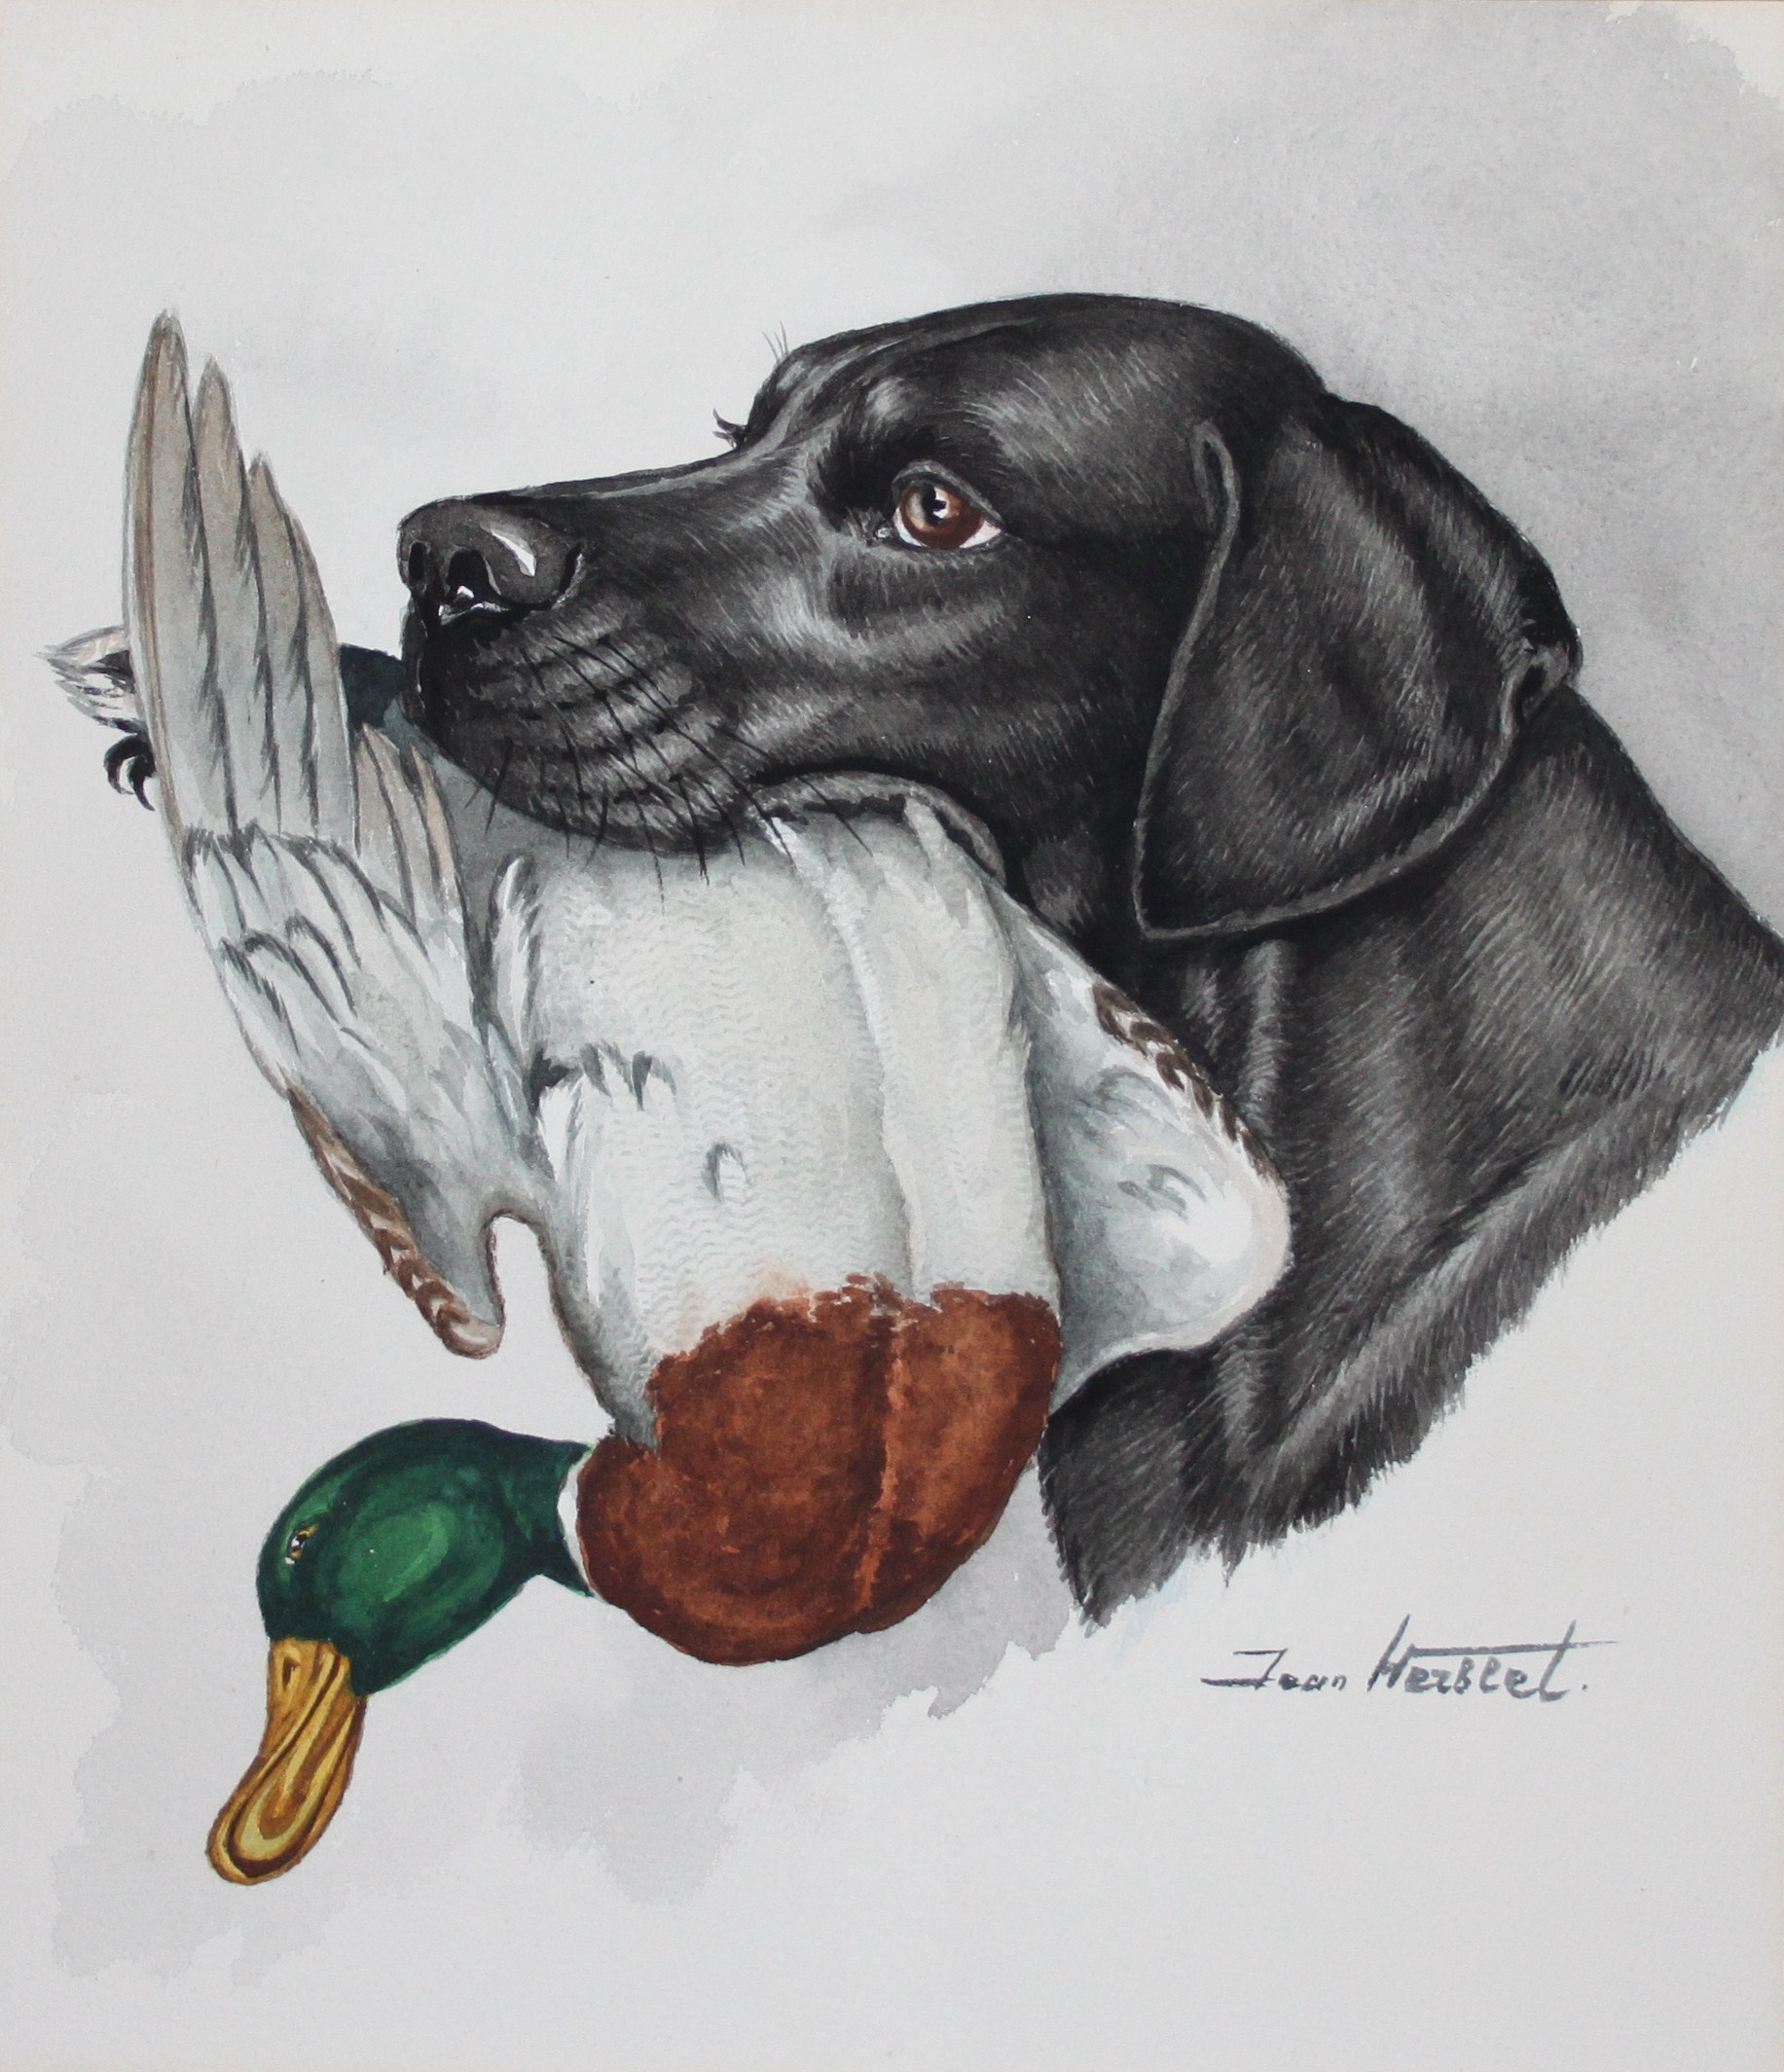 Click to see full size: Labrador by Jean Herblet